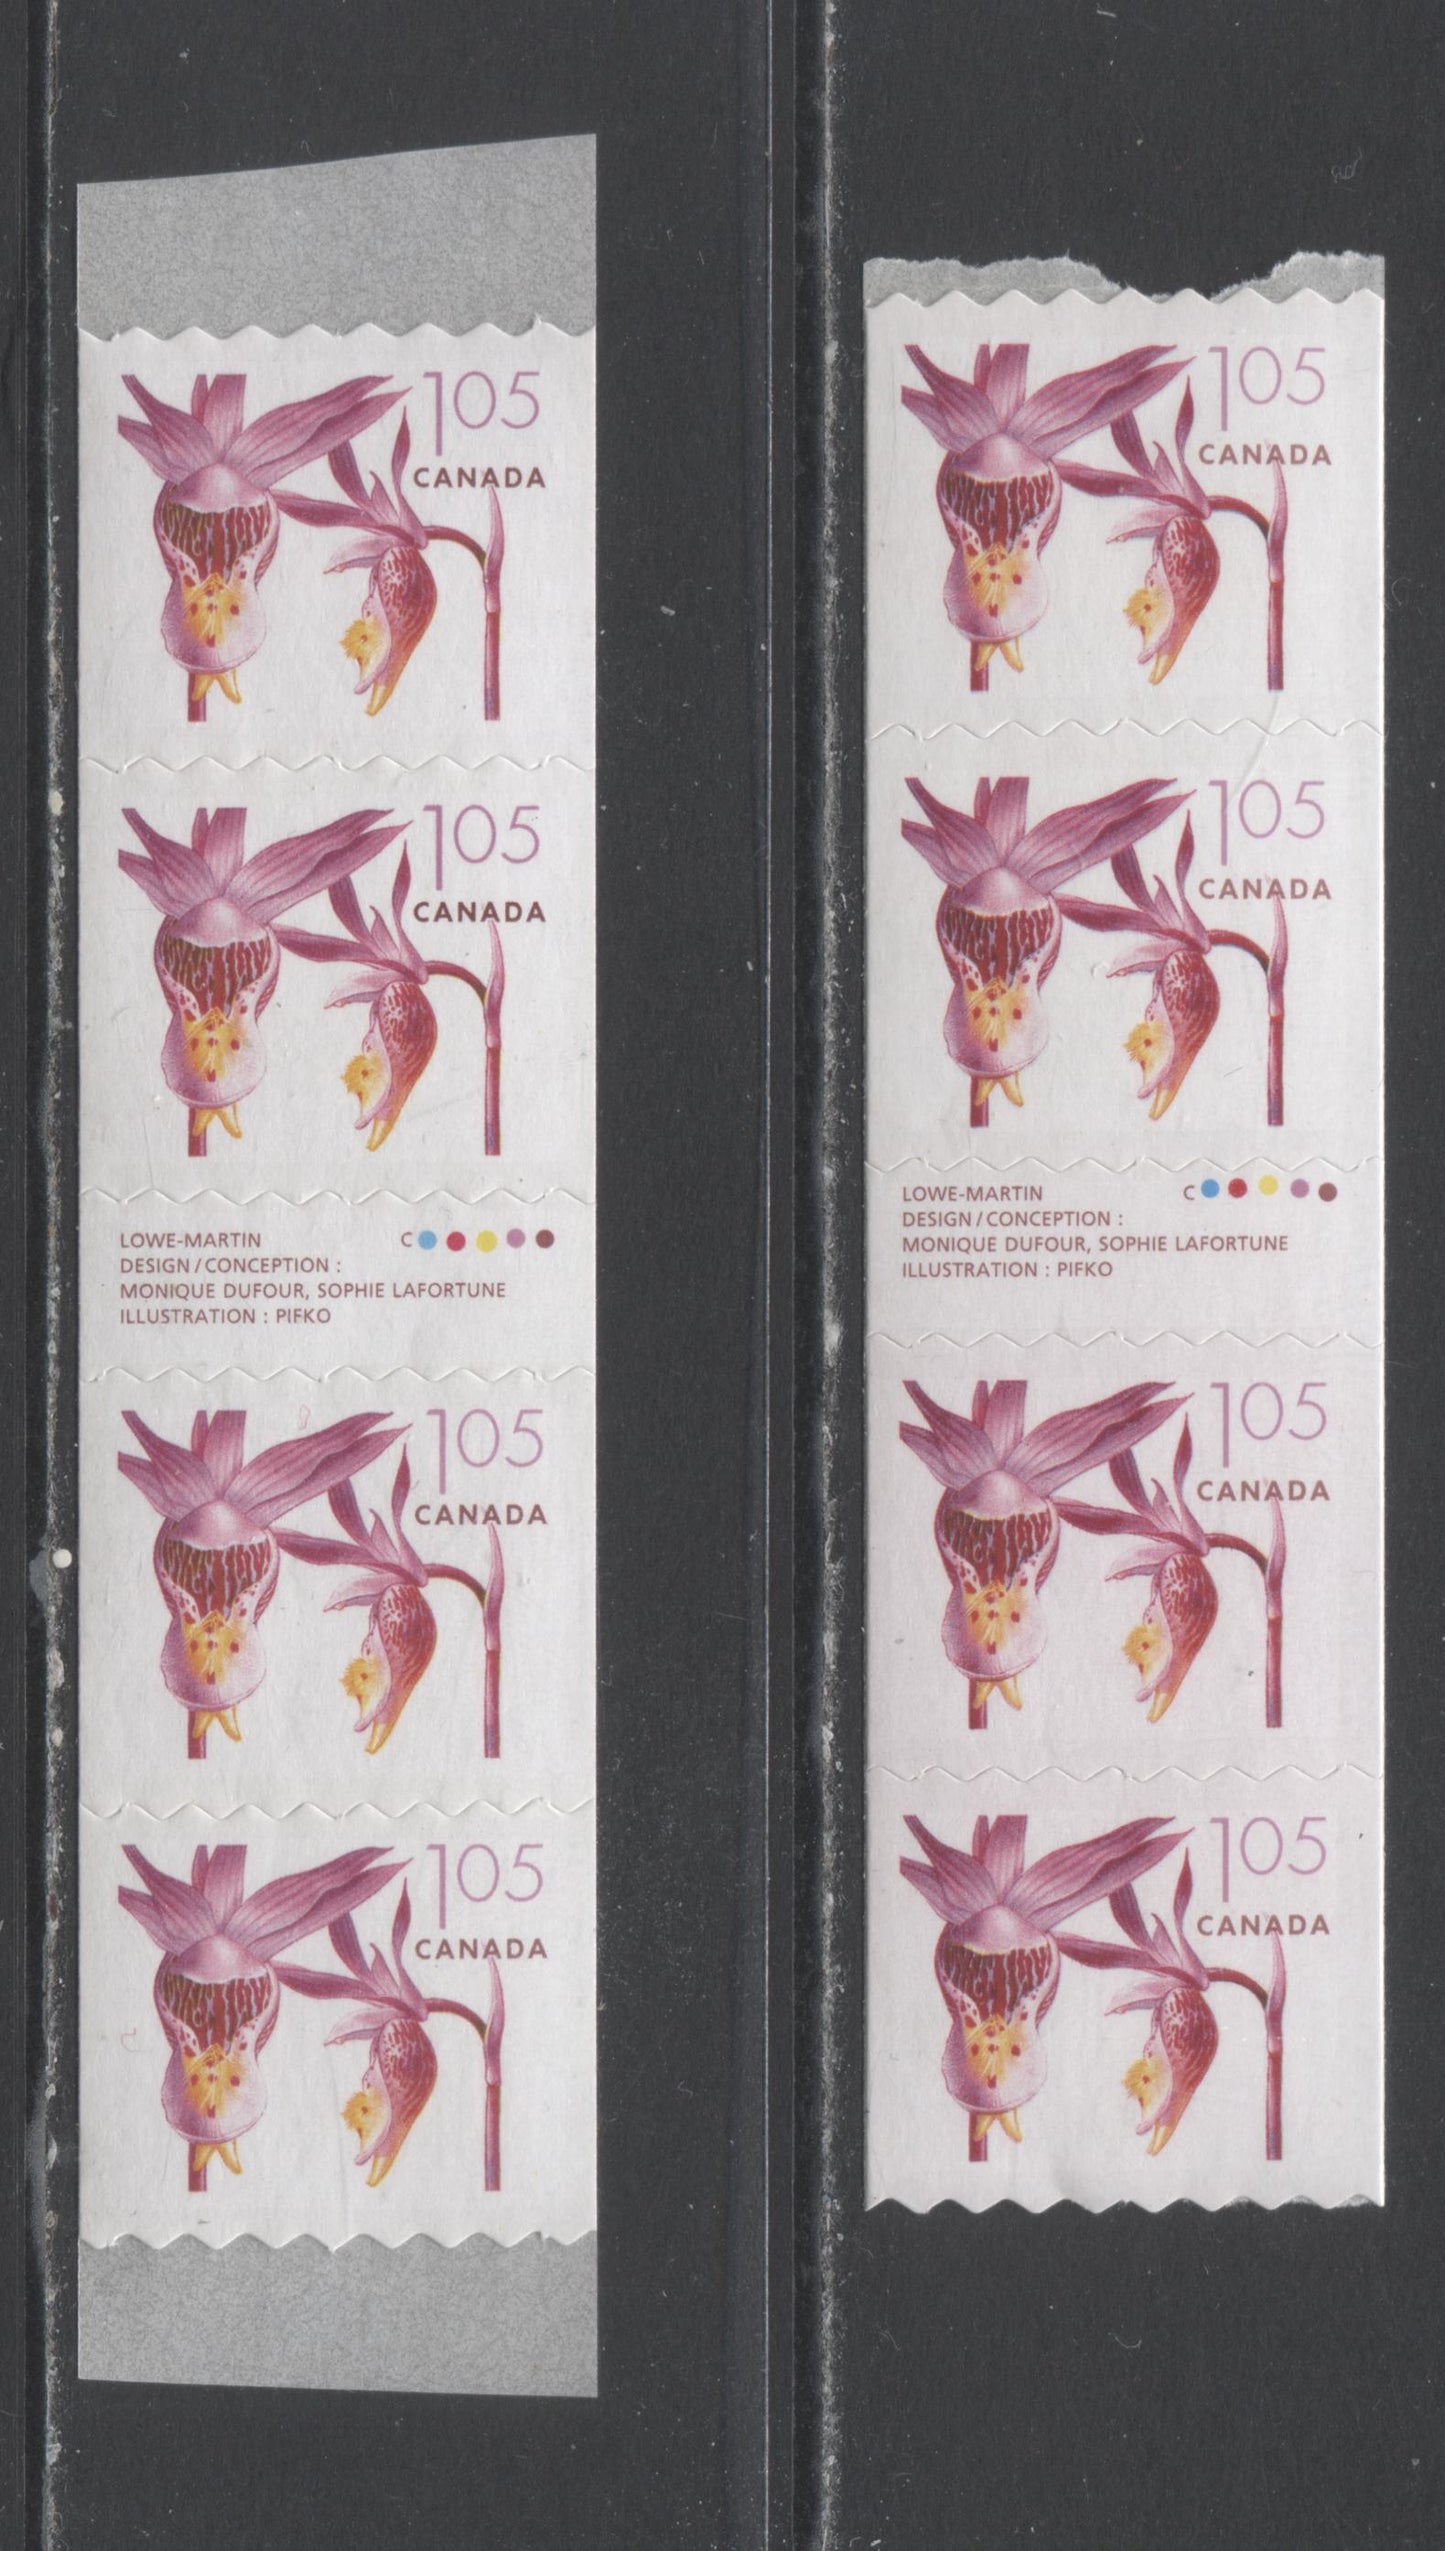 Lot 46 Canada #2130i $1.05 Multicolored Pink Fairy Slipper, 2005-2006 Flower Definitives (2) - Coils, 2 VFNH Gutter Strips Of 4 With "high" Inscription on DF & LF TRC Papers With Strong & Weak Tagging $21